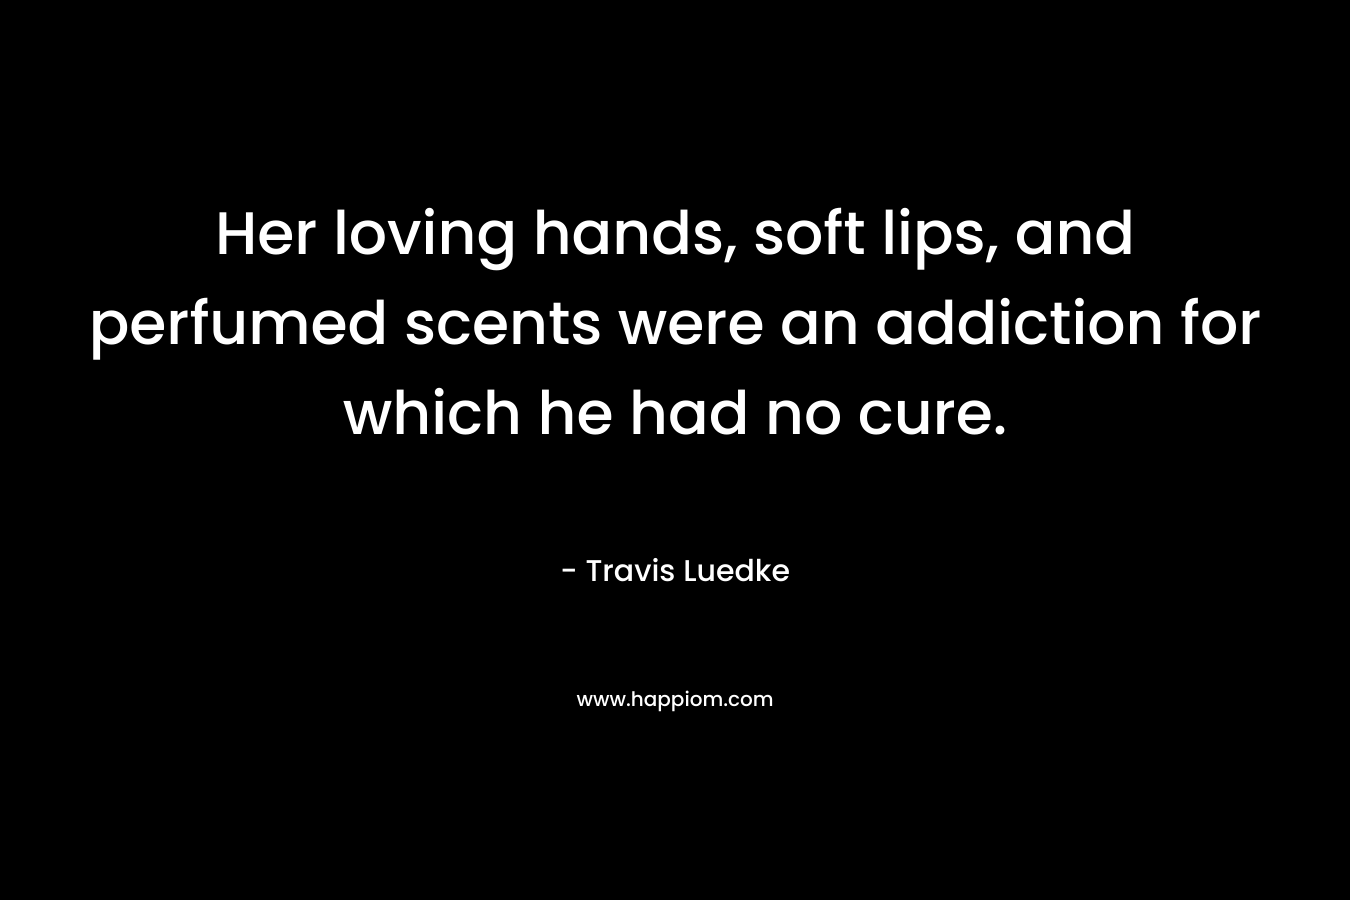 Her loving hands, soft lips, and perfumed scents were an addiction for which he had no cure.